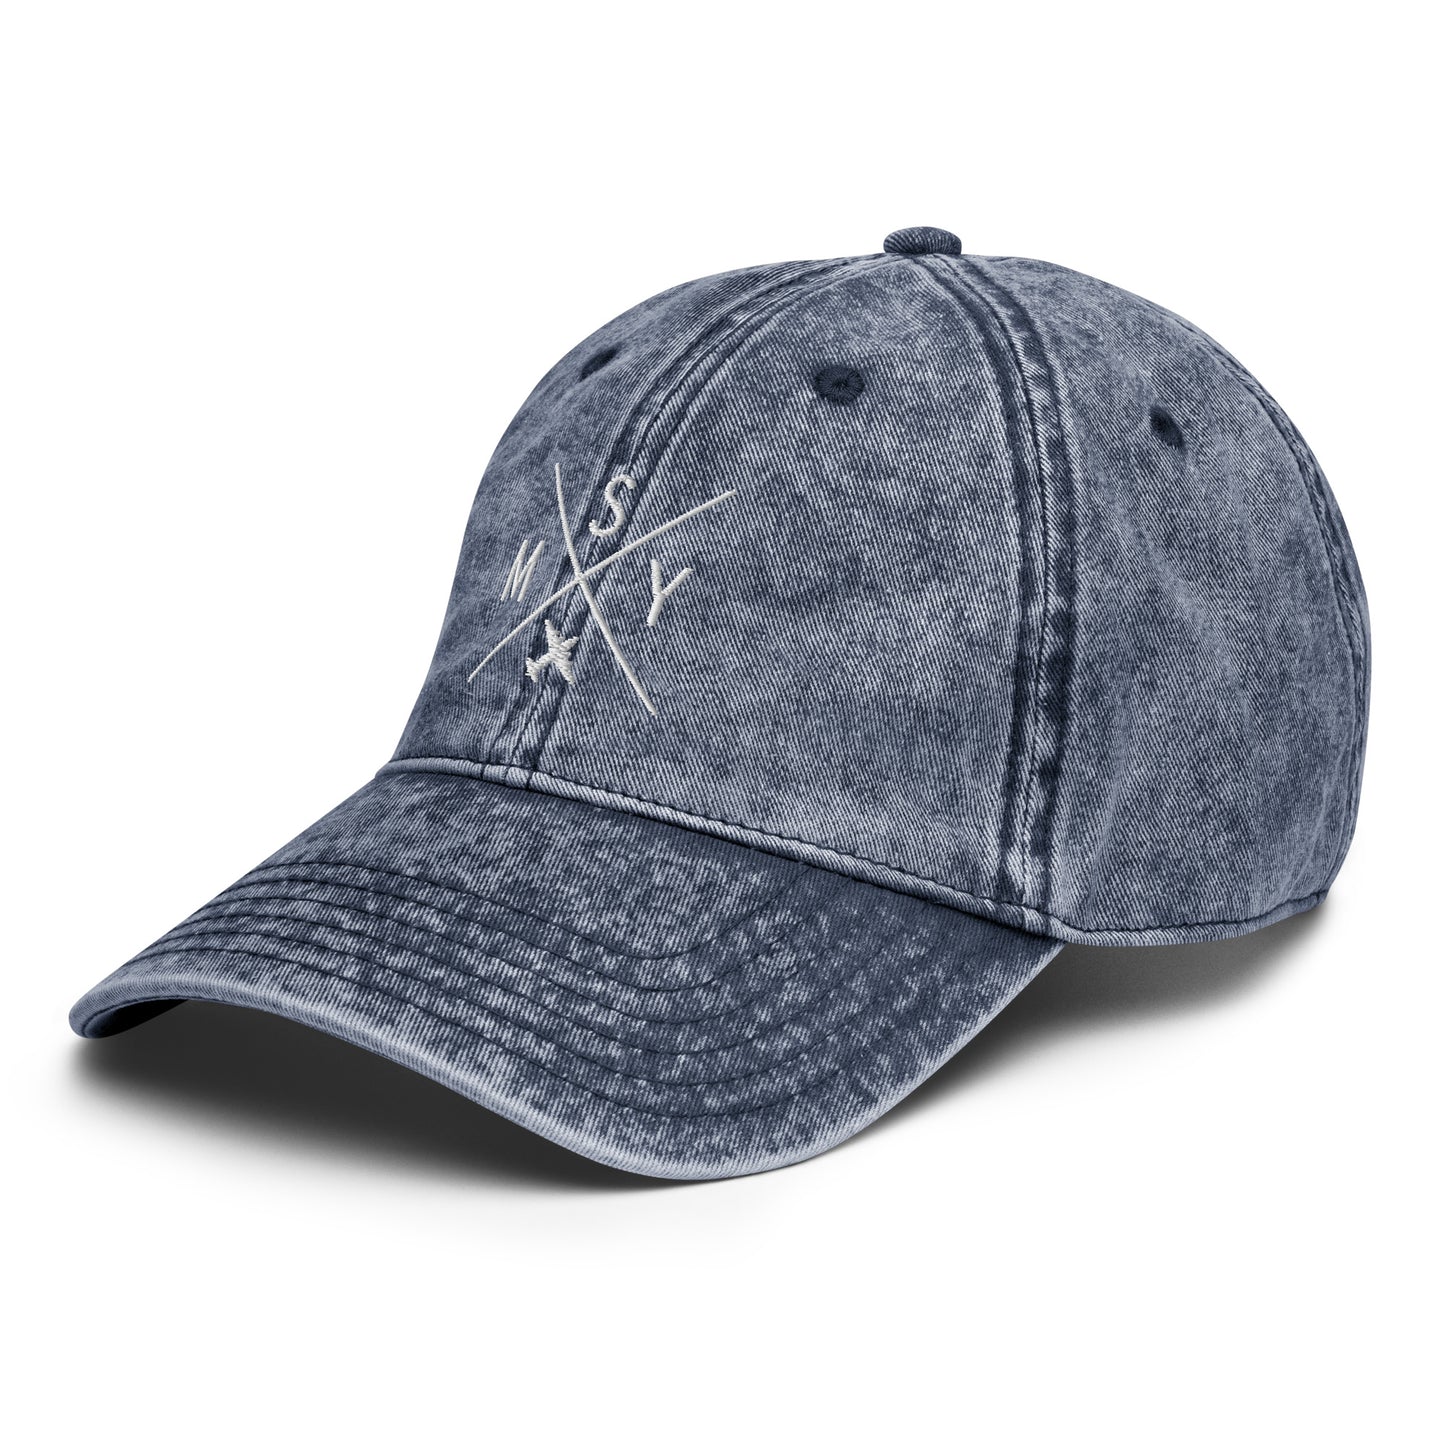 Crossed-X Cotton Twill Cap - White • MSY New Orleans • YHM Designs - Image 20